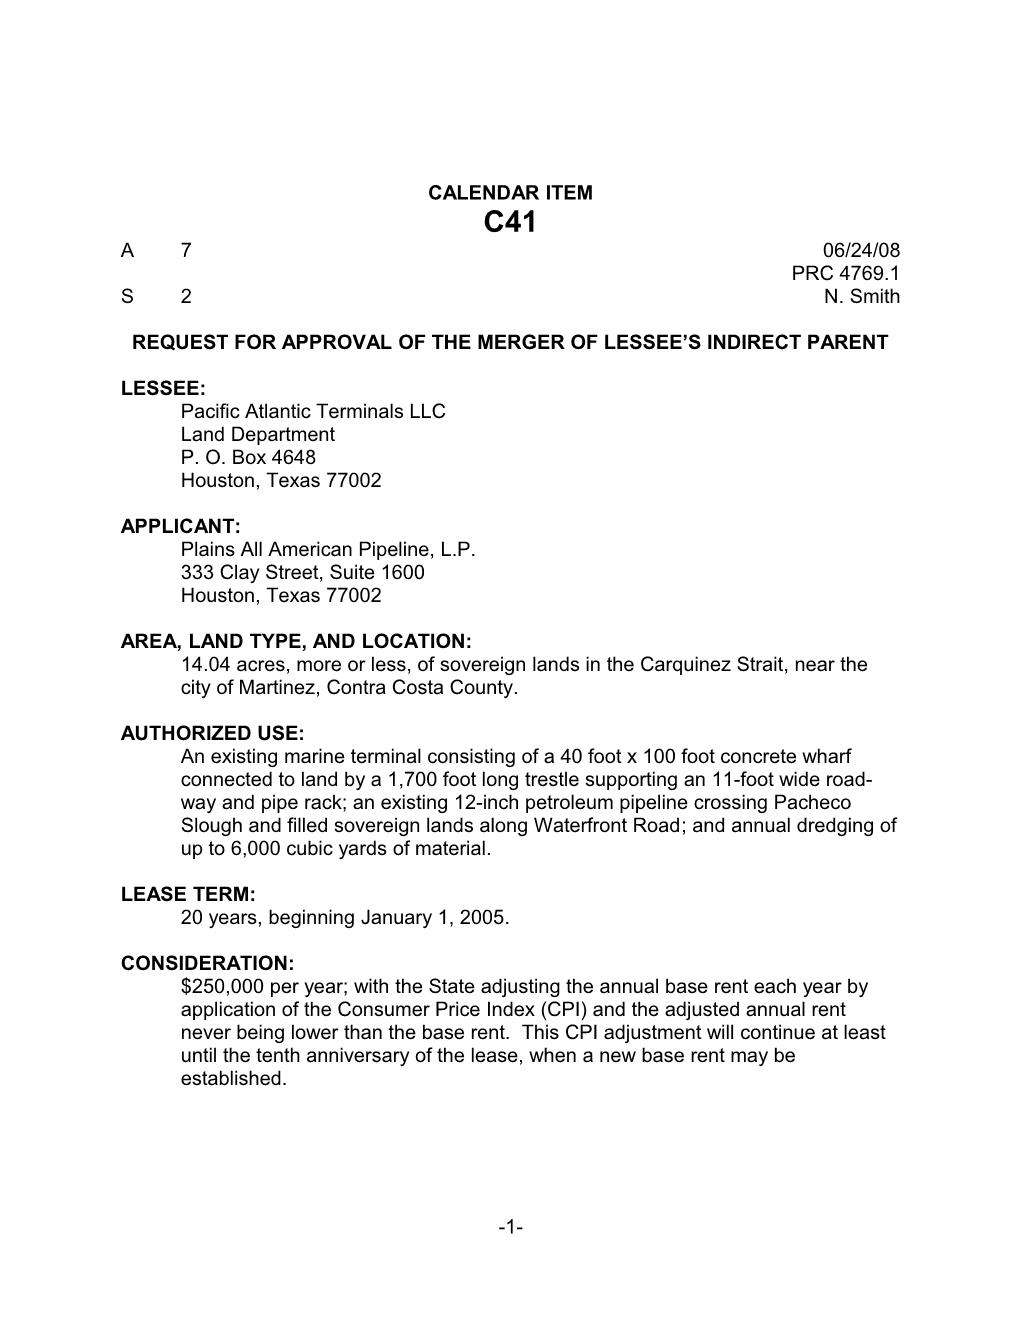 Request for Approval of the Merger of Lessee S Indirect Parent